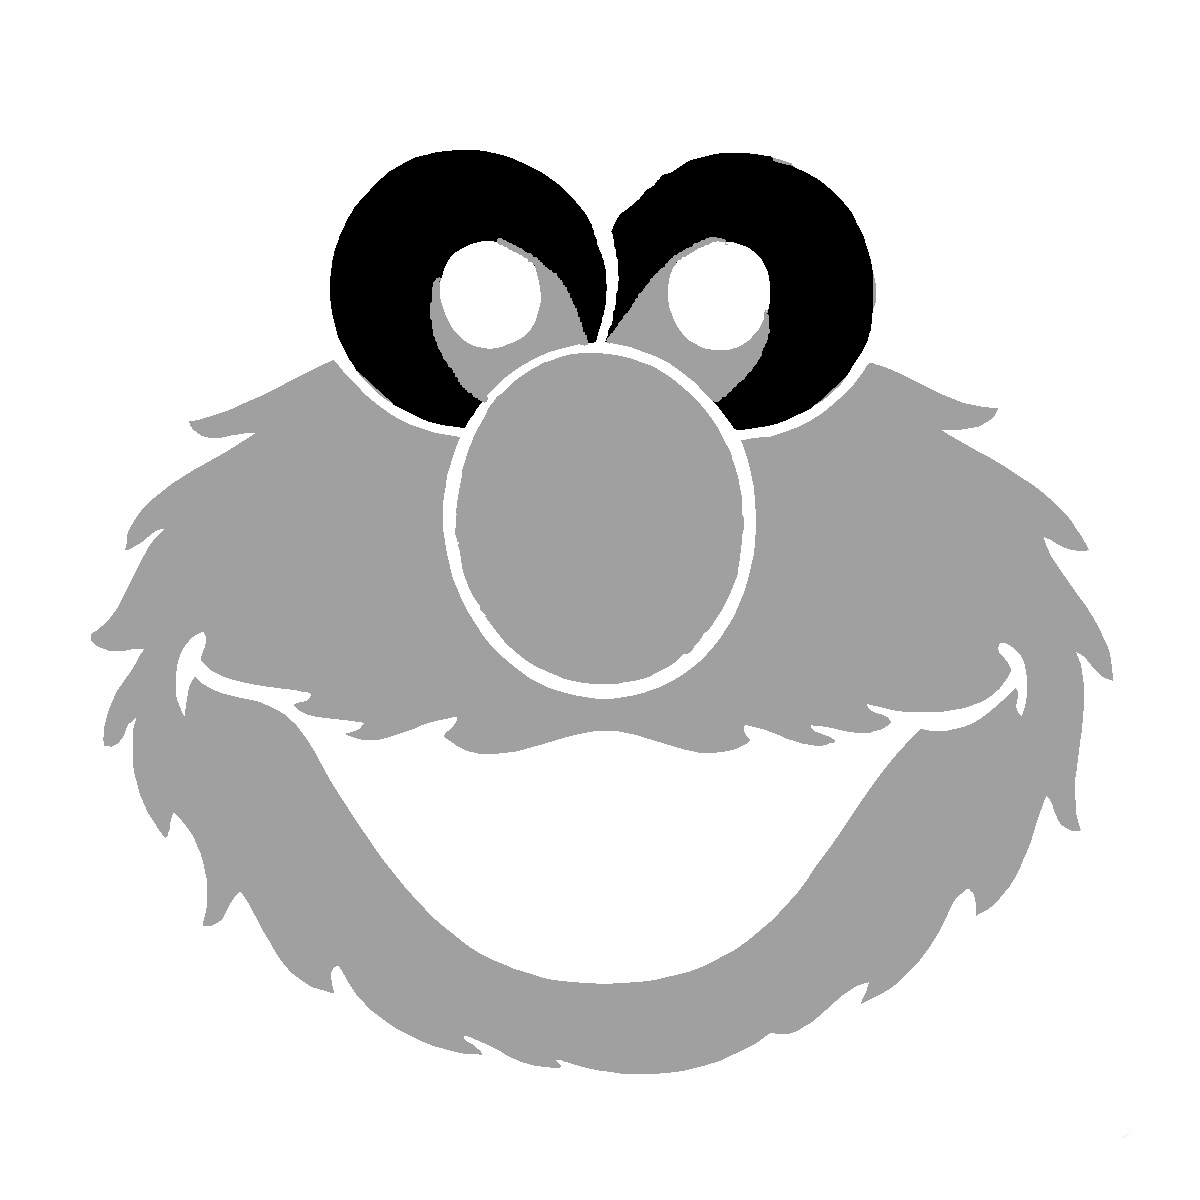 easy-elmo-face-pumpkin-carving-stencil-template-free-printable-funny